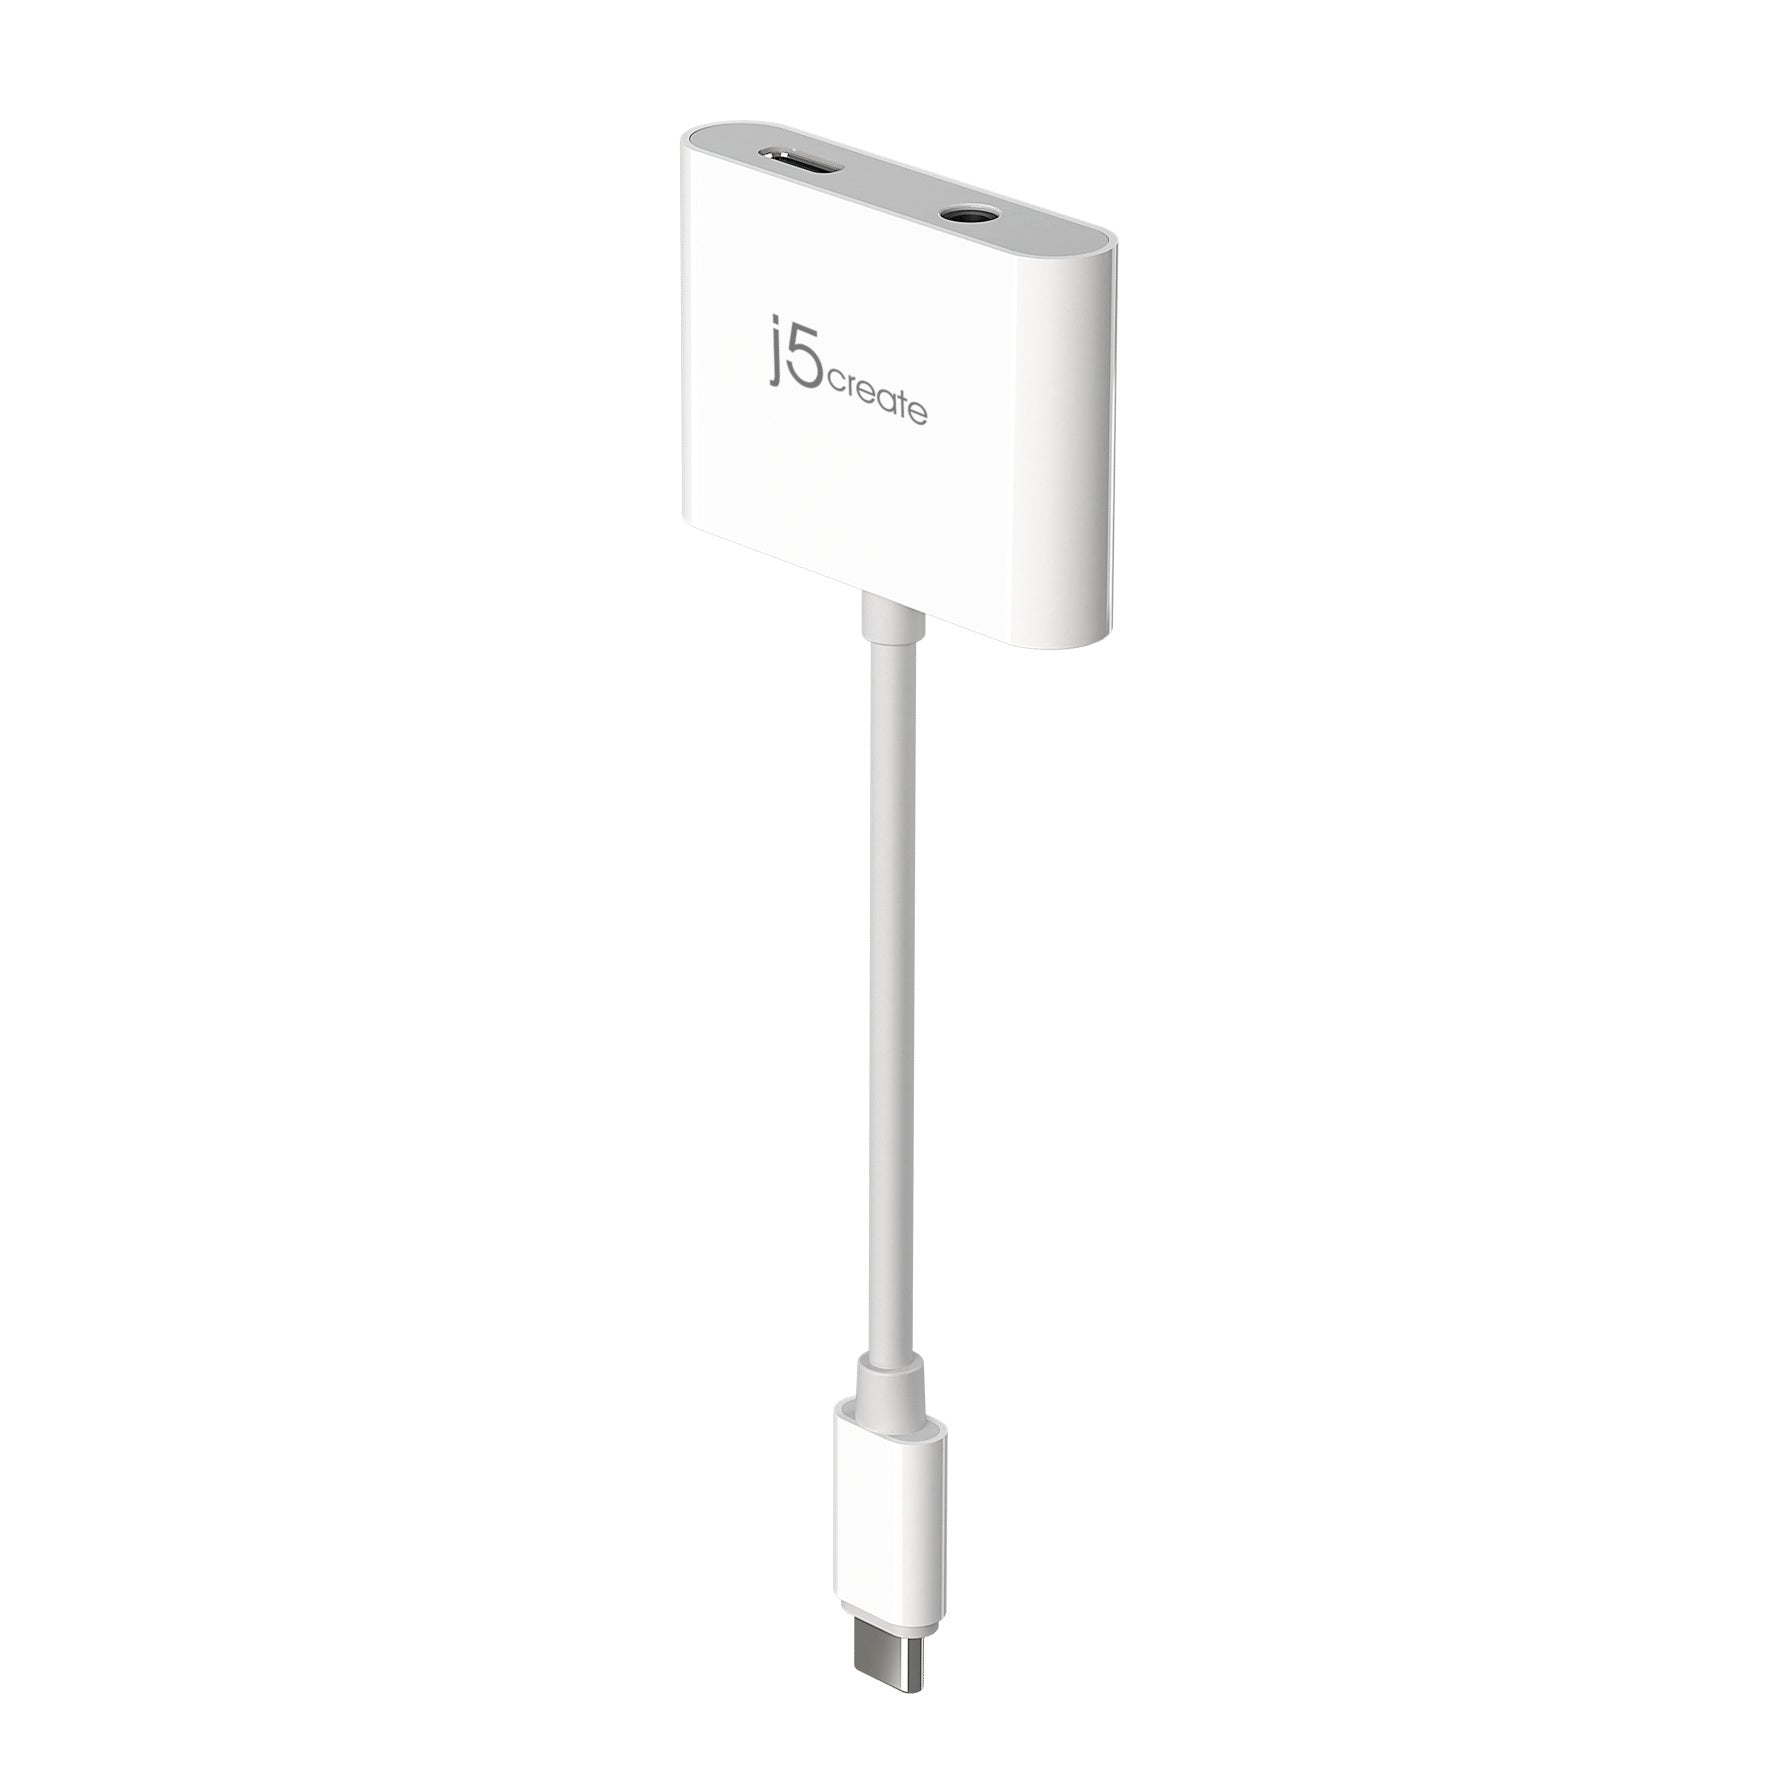 USB-C to Audio Jack, with Pass-Through USB-C and PD Charging